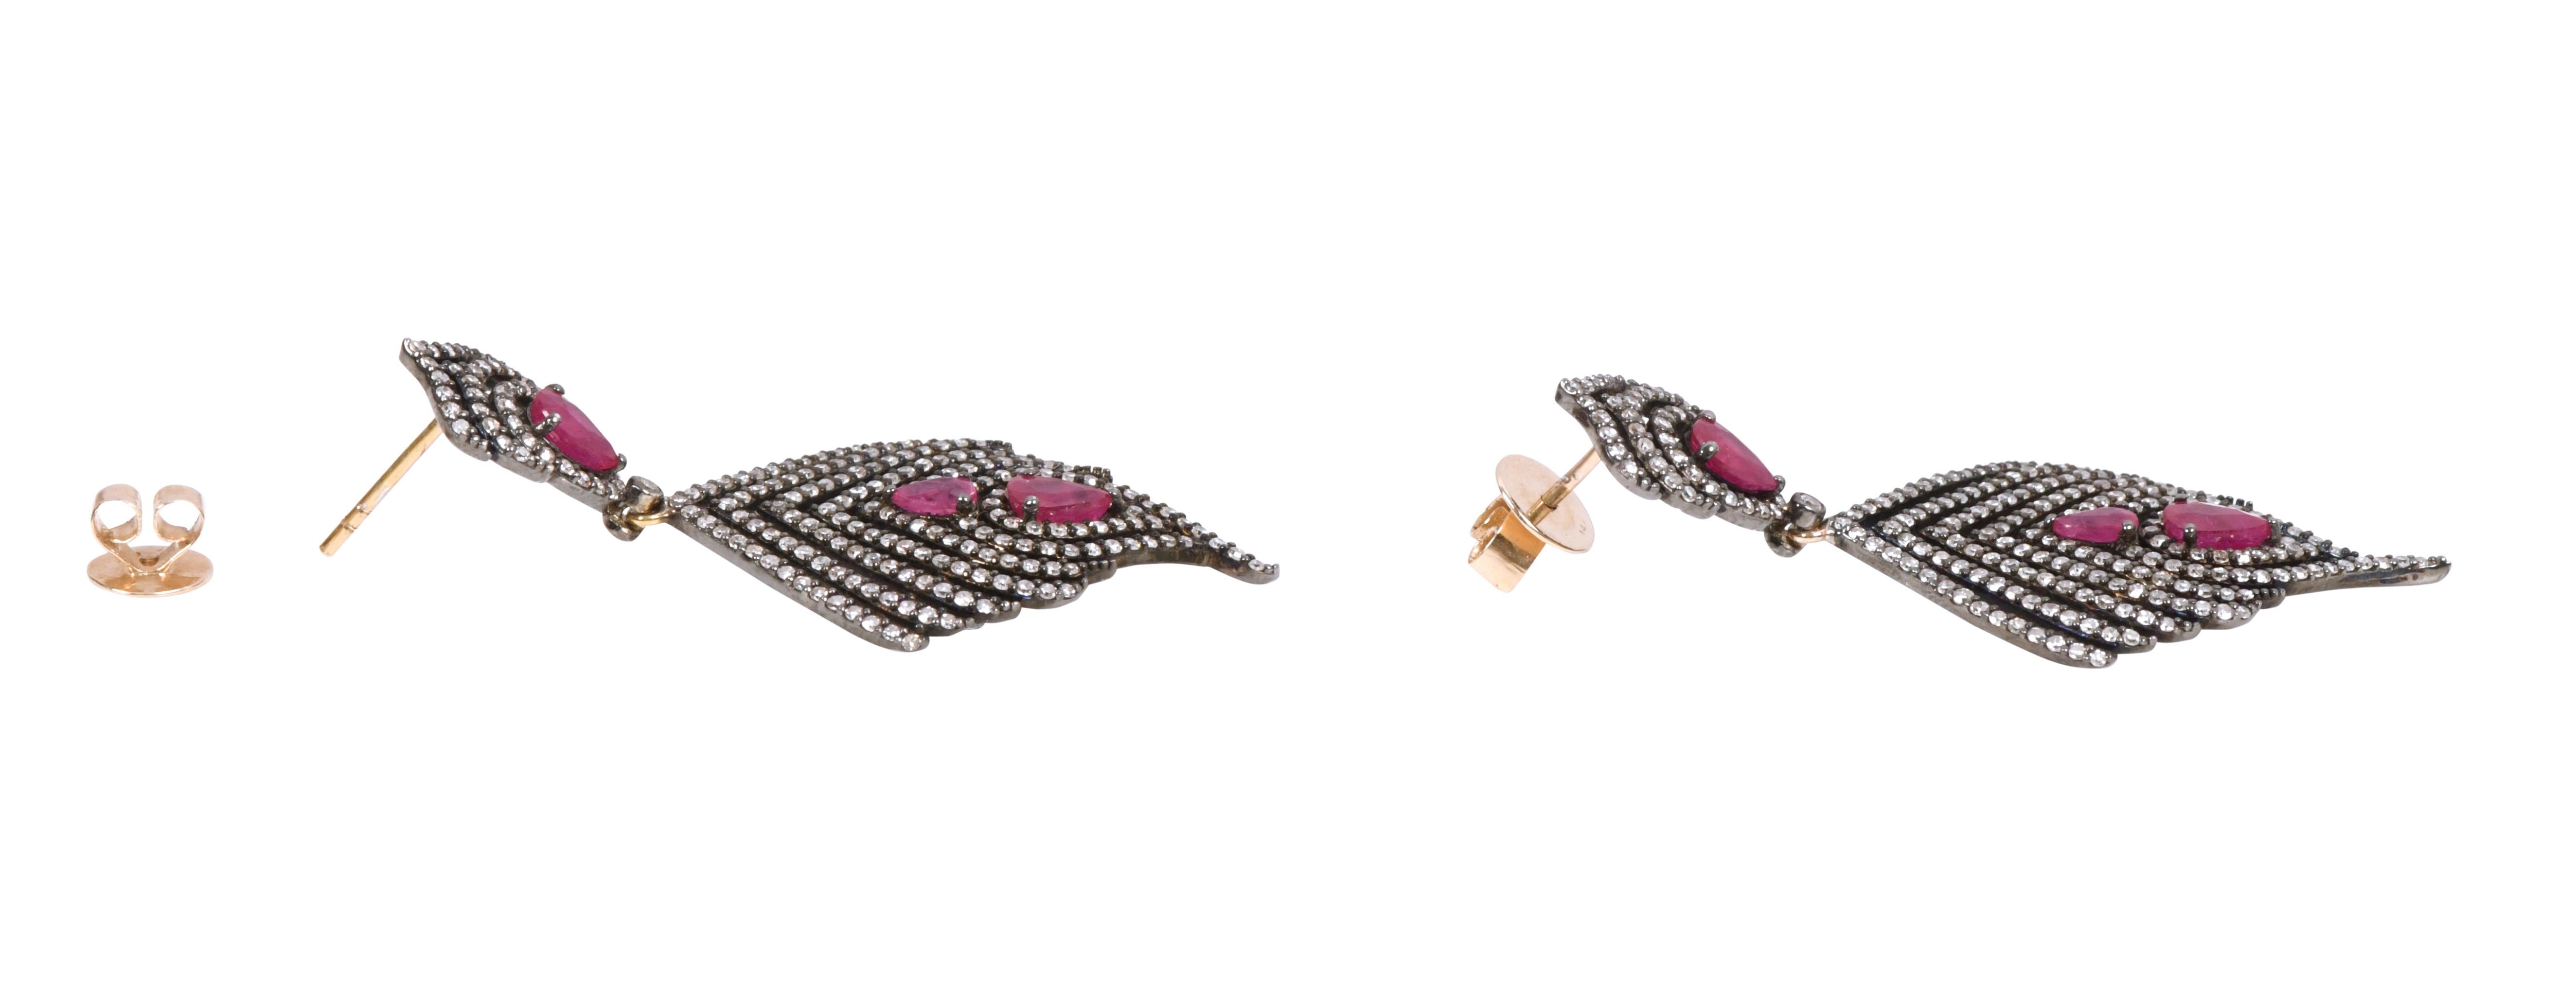 5.12 Carat Ruby and Diamond Drop Earrings in Victorian Style For Sale 2